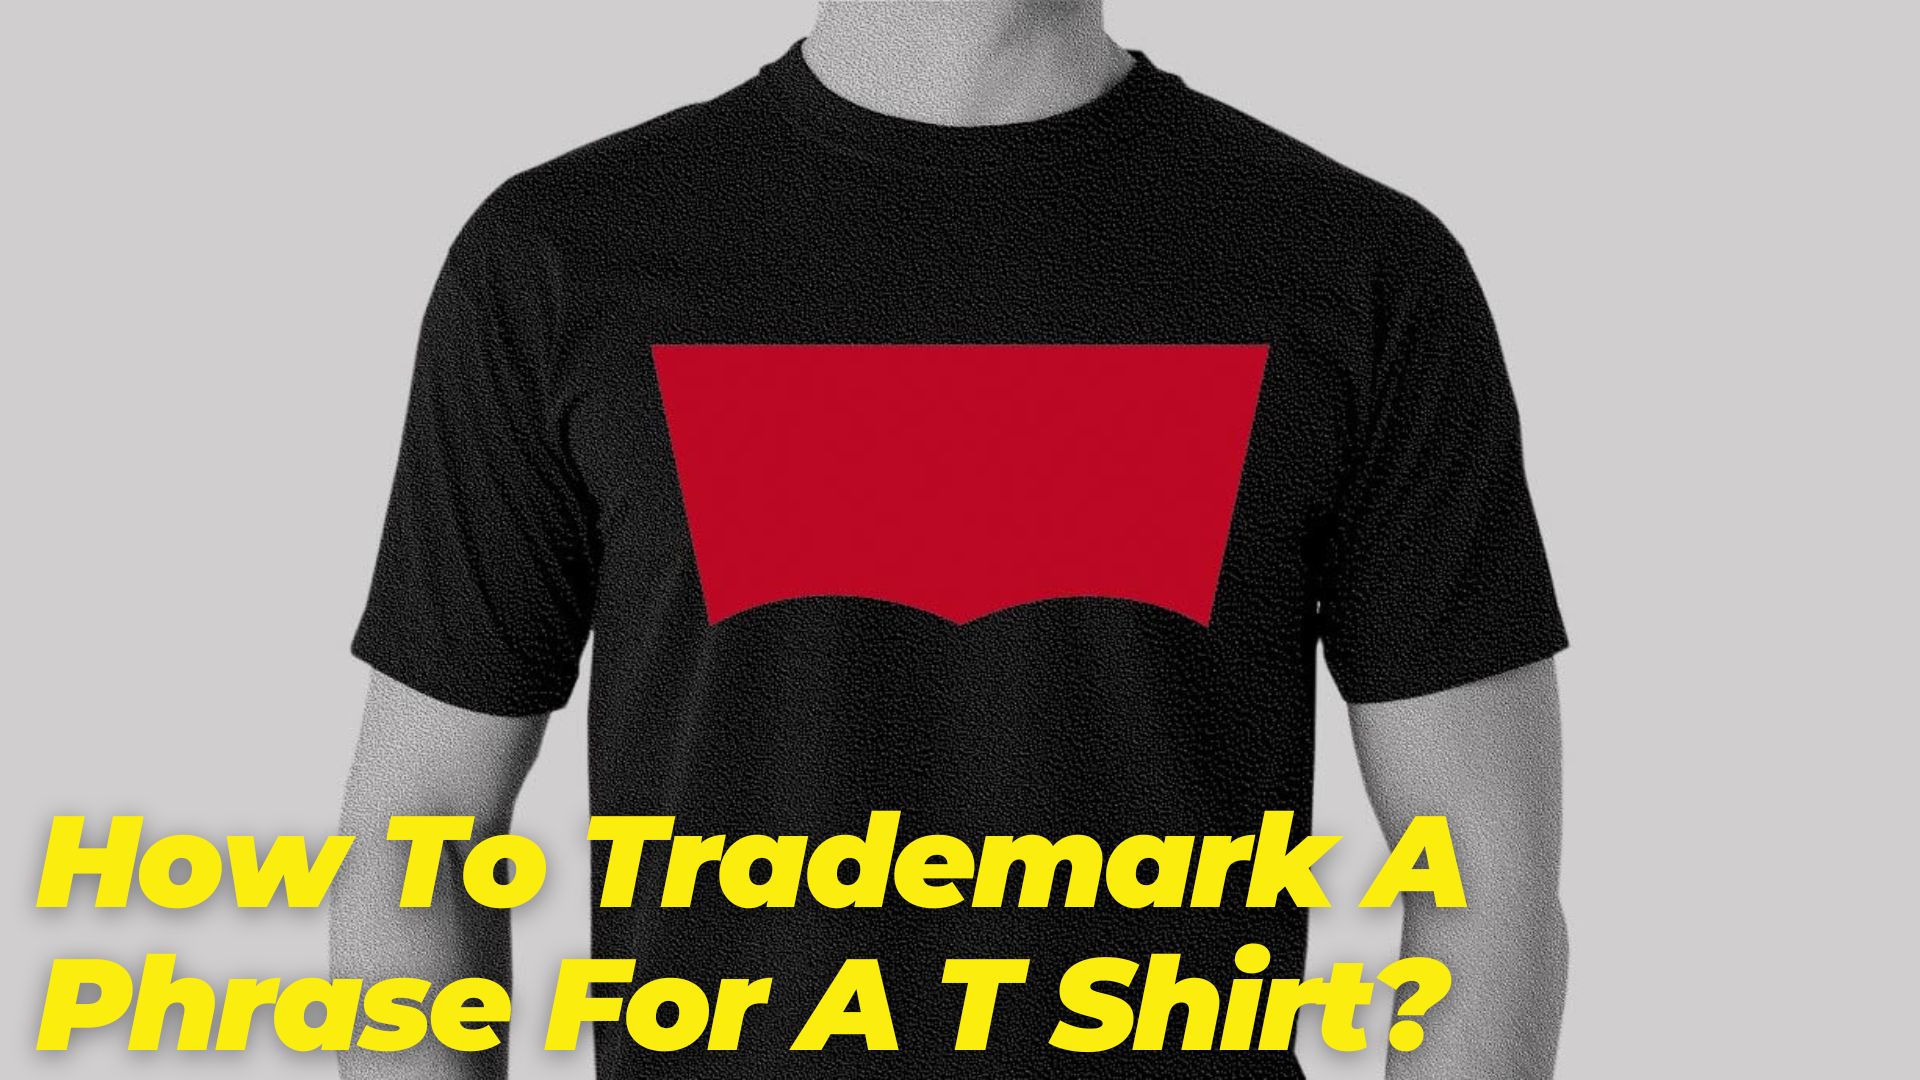 How To Trademark A Phrase For A T Shirt?